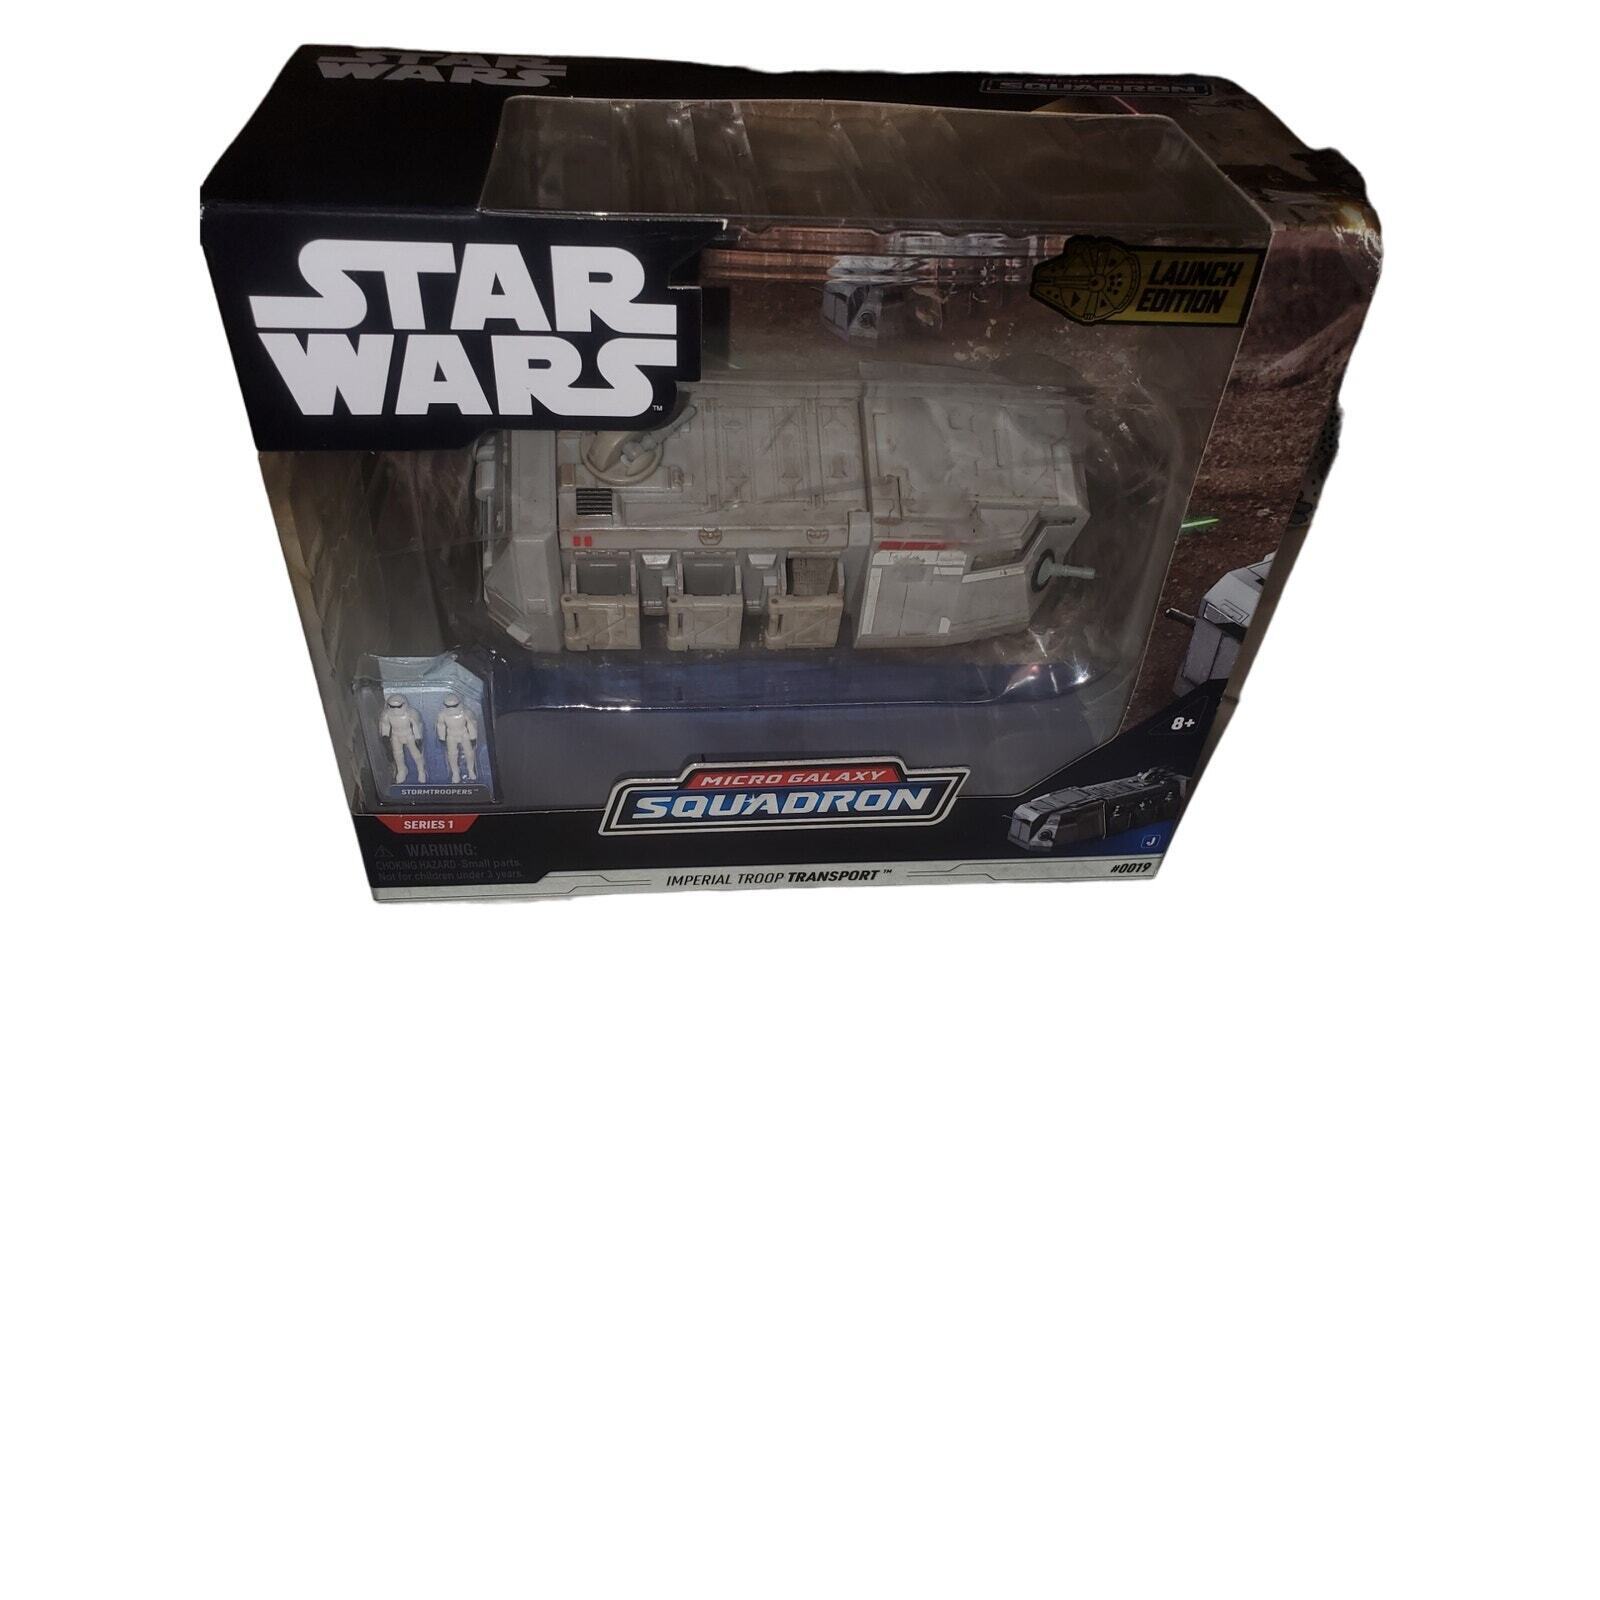 Star Wars Micro Galaxiy Squadron Imperial troop transport launch edition